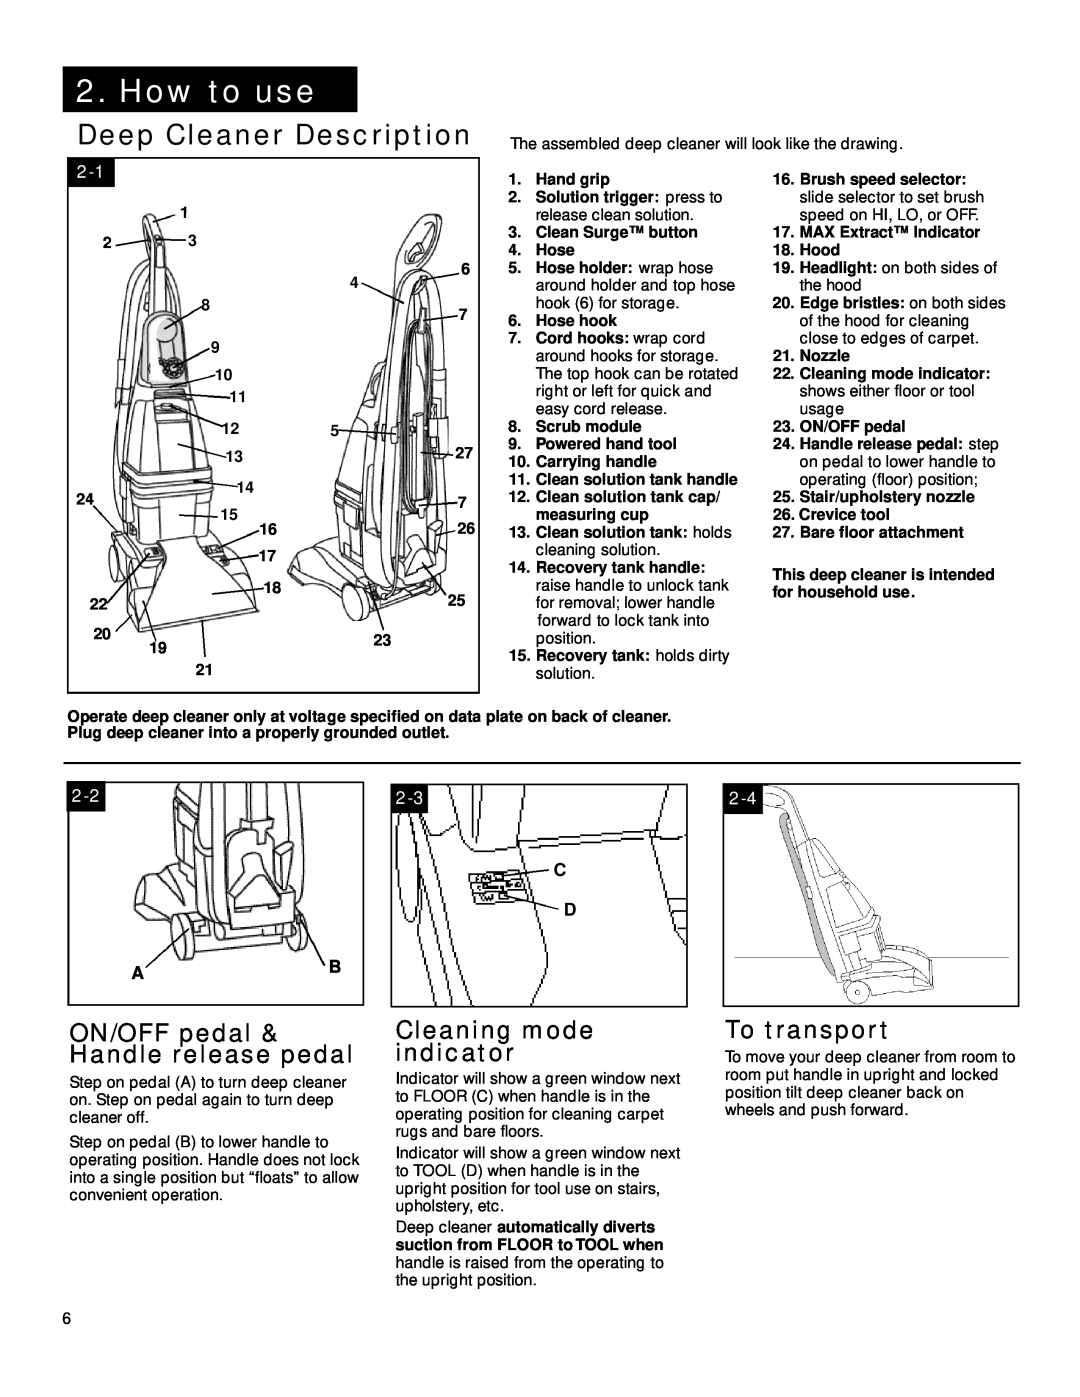 Hoover SpinScrub manual How to use, ON/OFF pedal & Handle release pedal, Cleaning mode indicator, To transport 